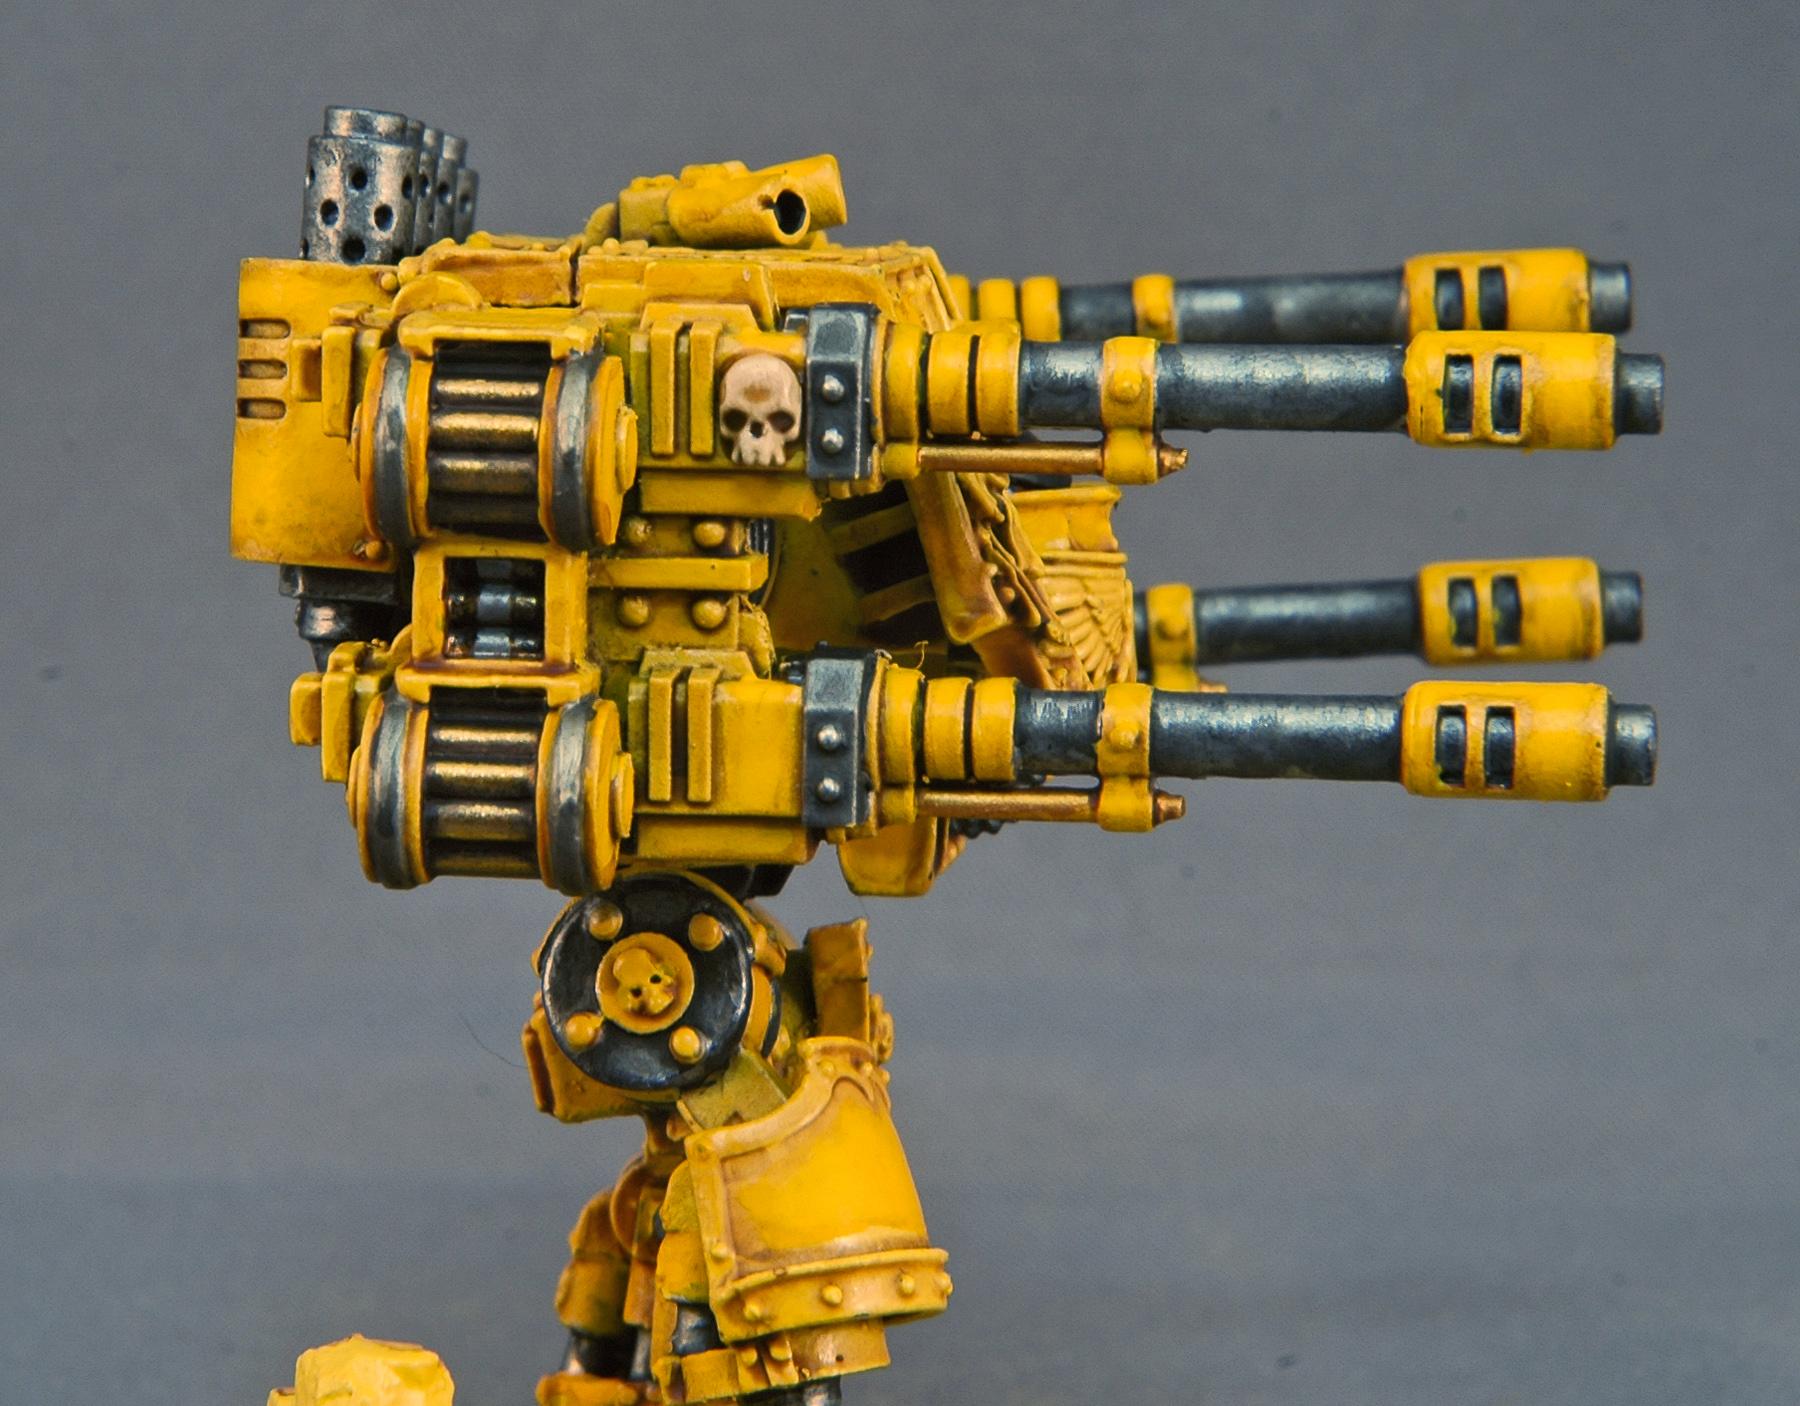 Autocannons, Dreadnought, Mantis Warriors, Rifleman, Space Marines, Tranquility, Venerable, Warhammer 40,000